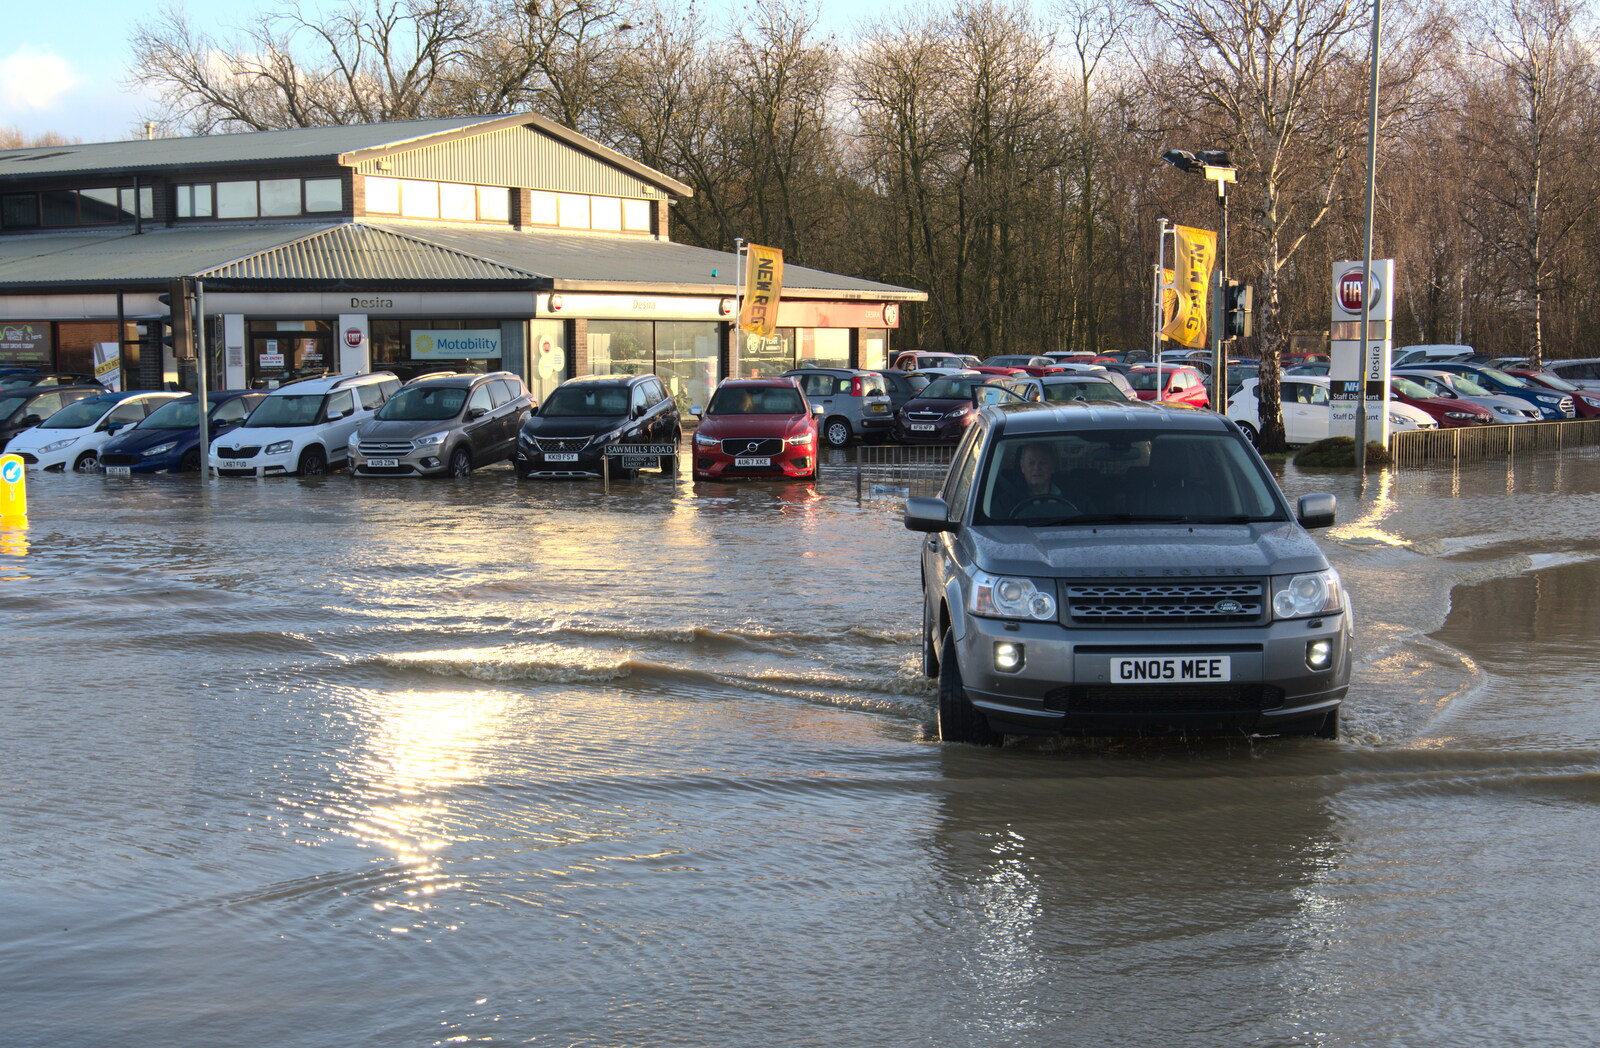 A Land Rover makes it through from The Christmas Eve Floods, Diss, Norfolk - 24th December 2020